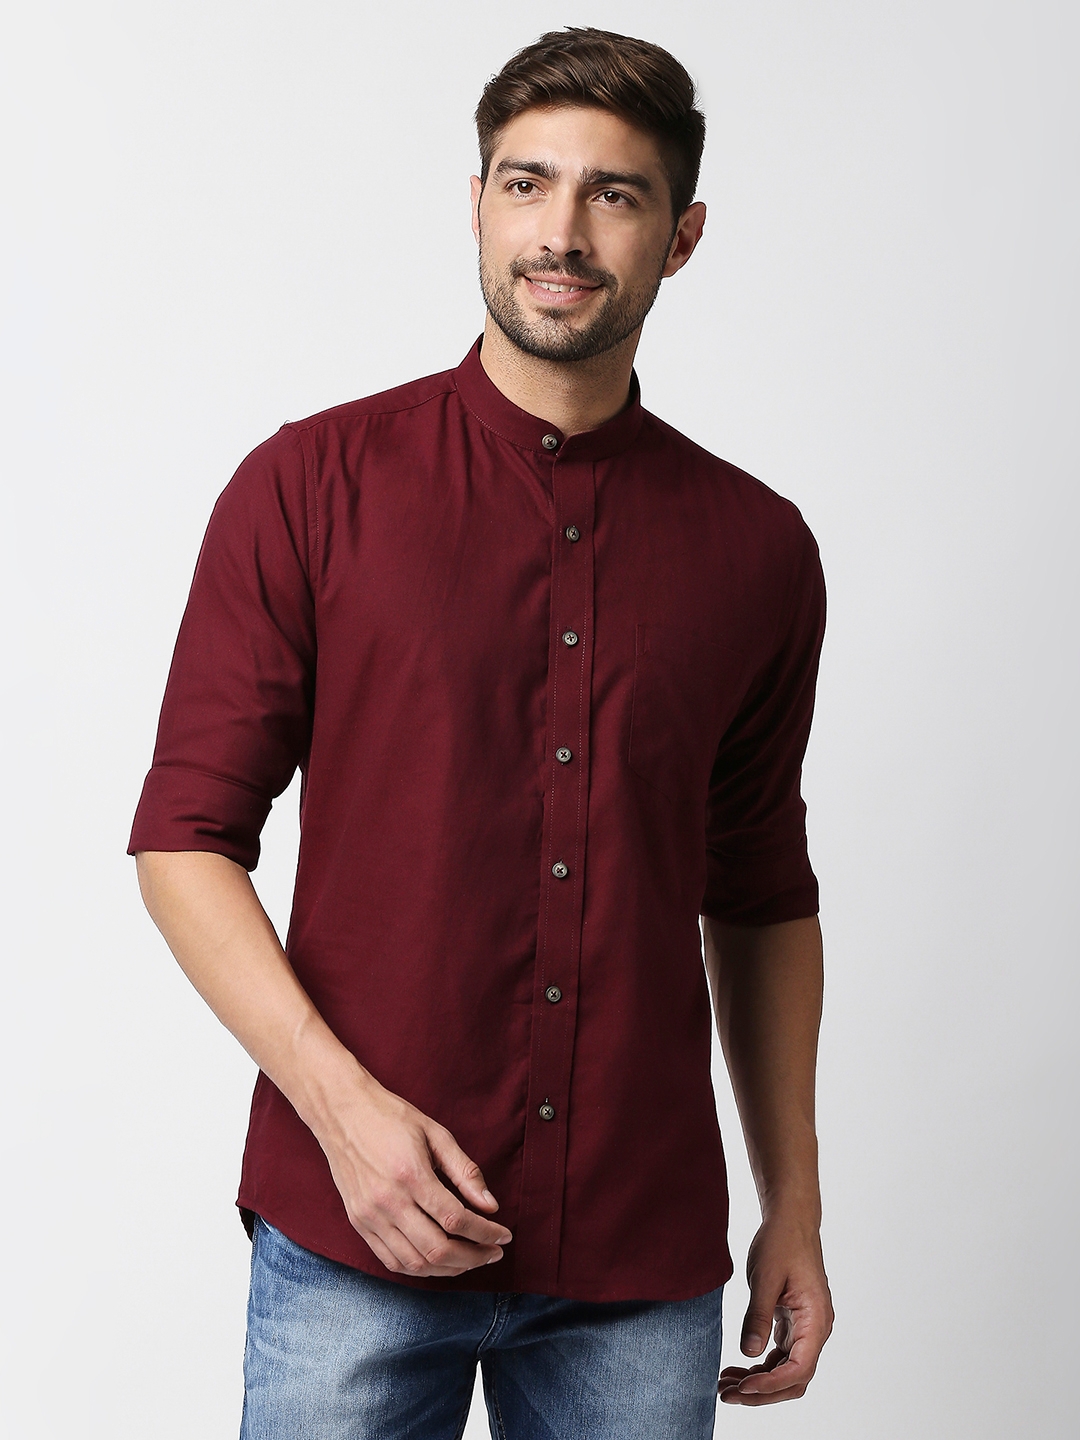 EVOQ | EVOQ's Maroon Flannel Full Sleeves Cotton Casual Shirt with Mandarin Collar for Men